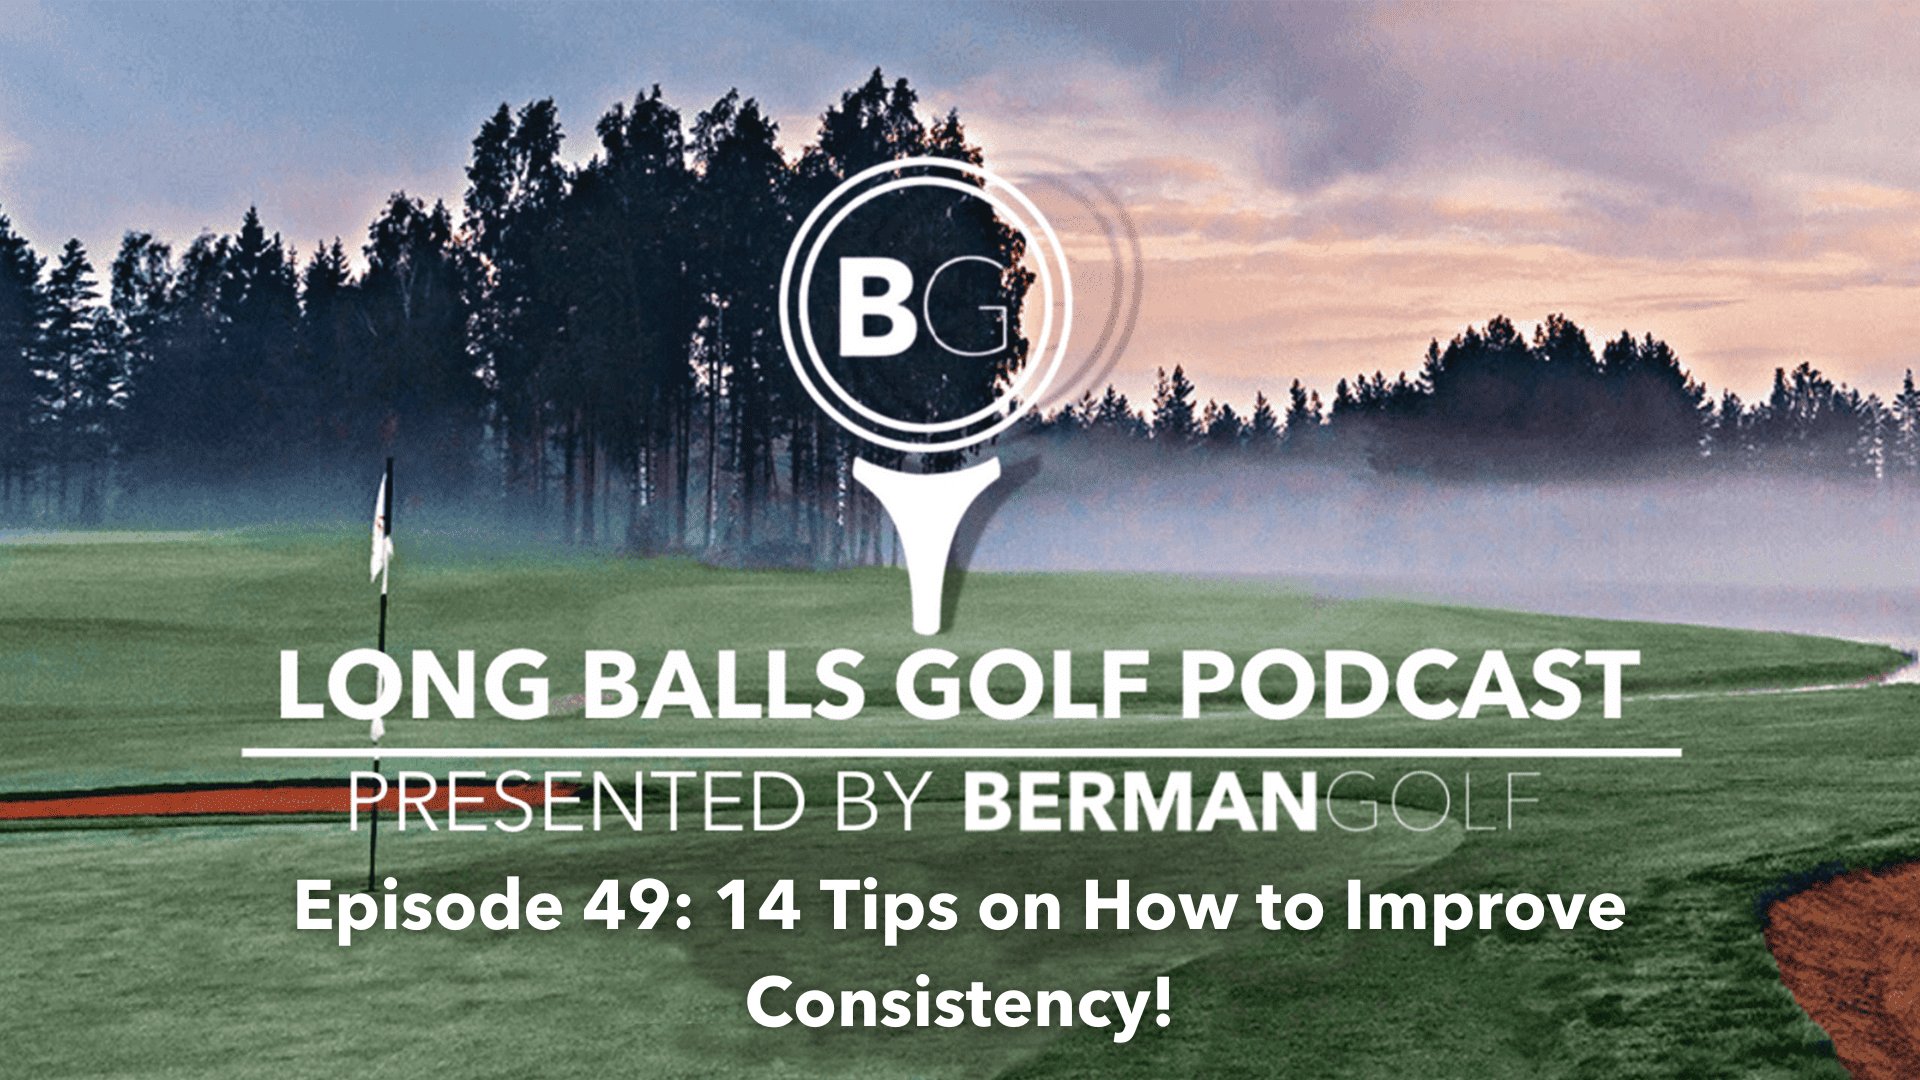 Episode 49: 14 Tips on How to Improve Your Consistency